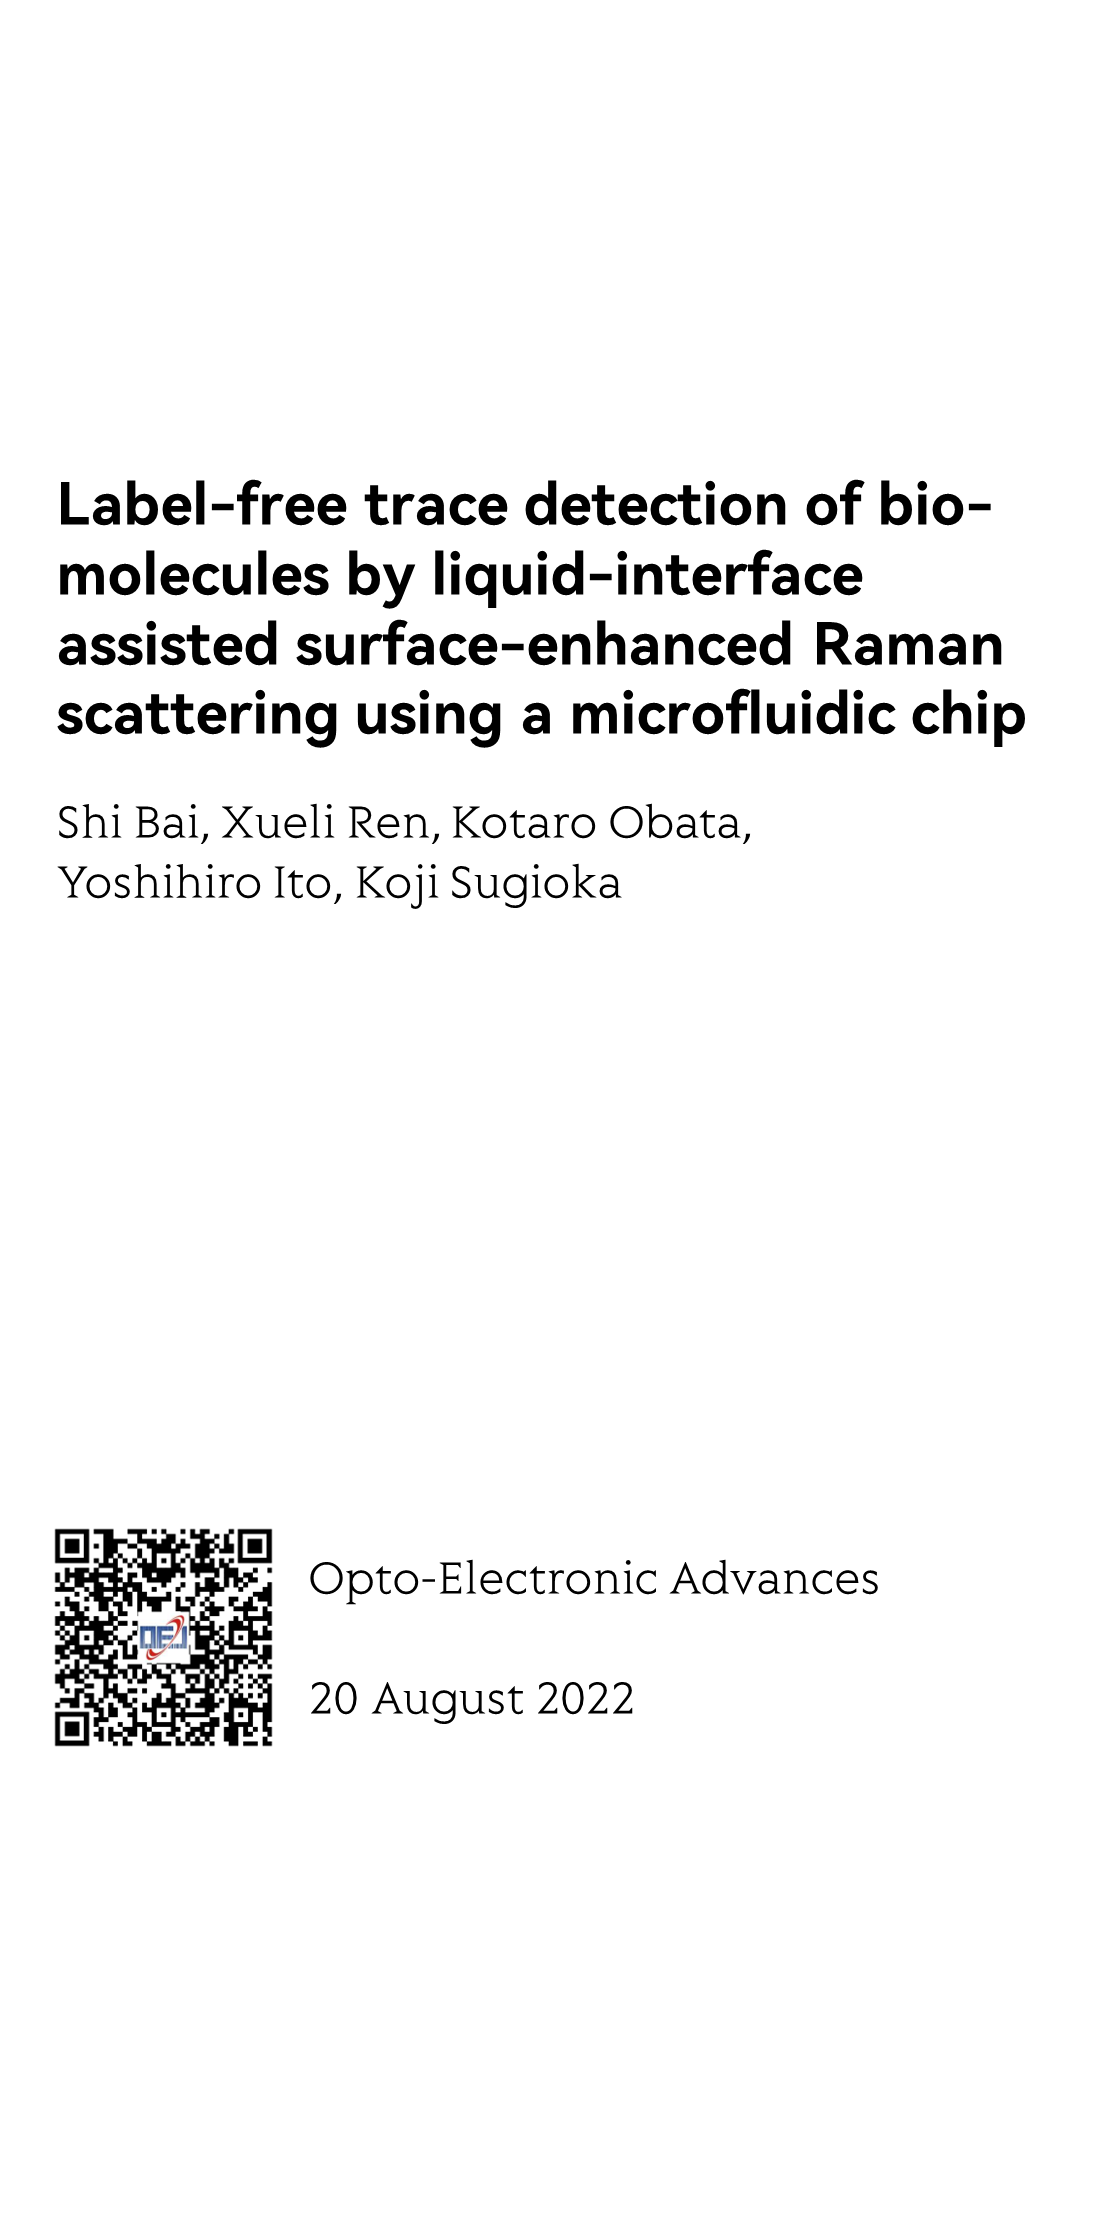 Label-free trace detection of bio-molecules by liquid-interface assisted surface-enhanced Raman scattering using a microfluidic chip_1